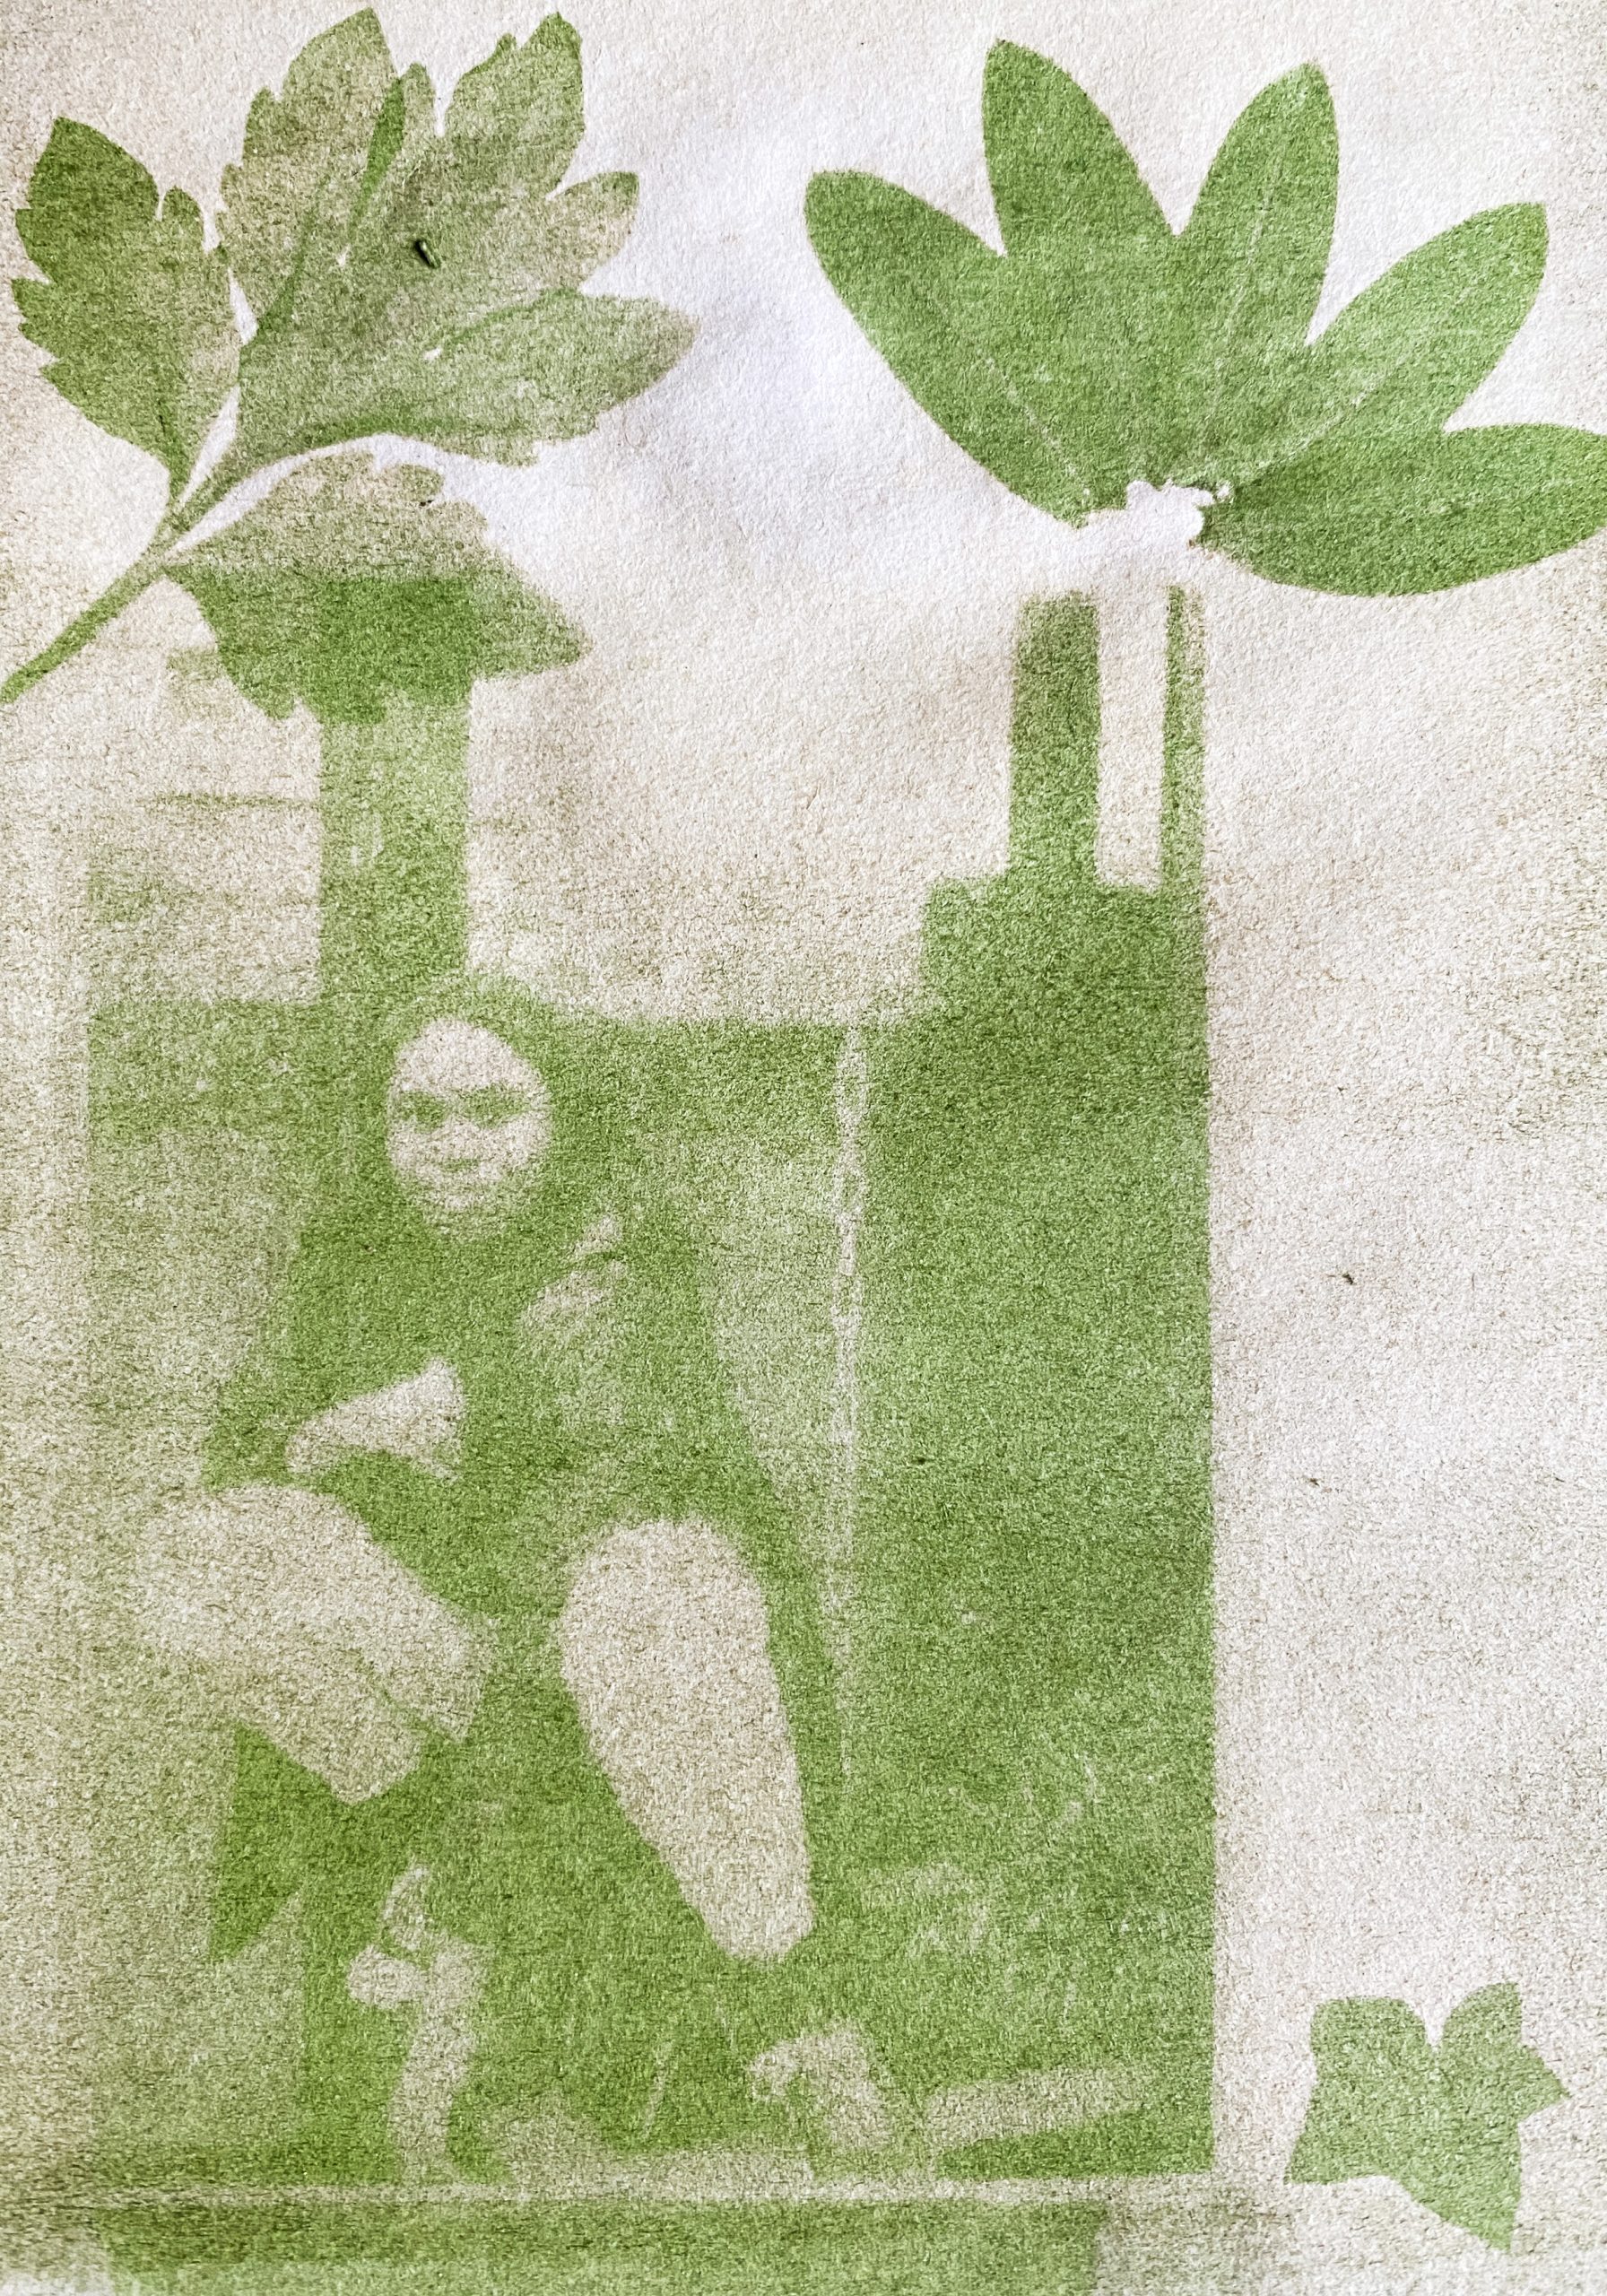 Anthotype image of young person crouched on a rain garden surrounded by leaves